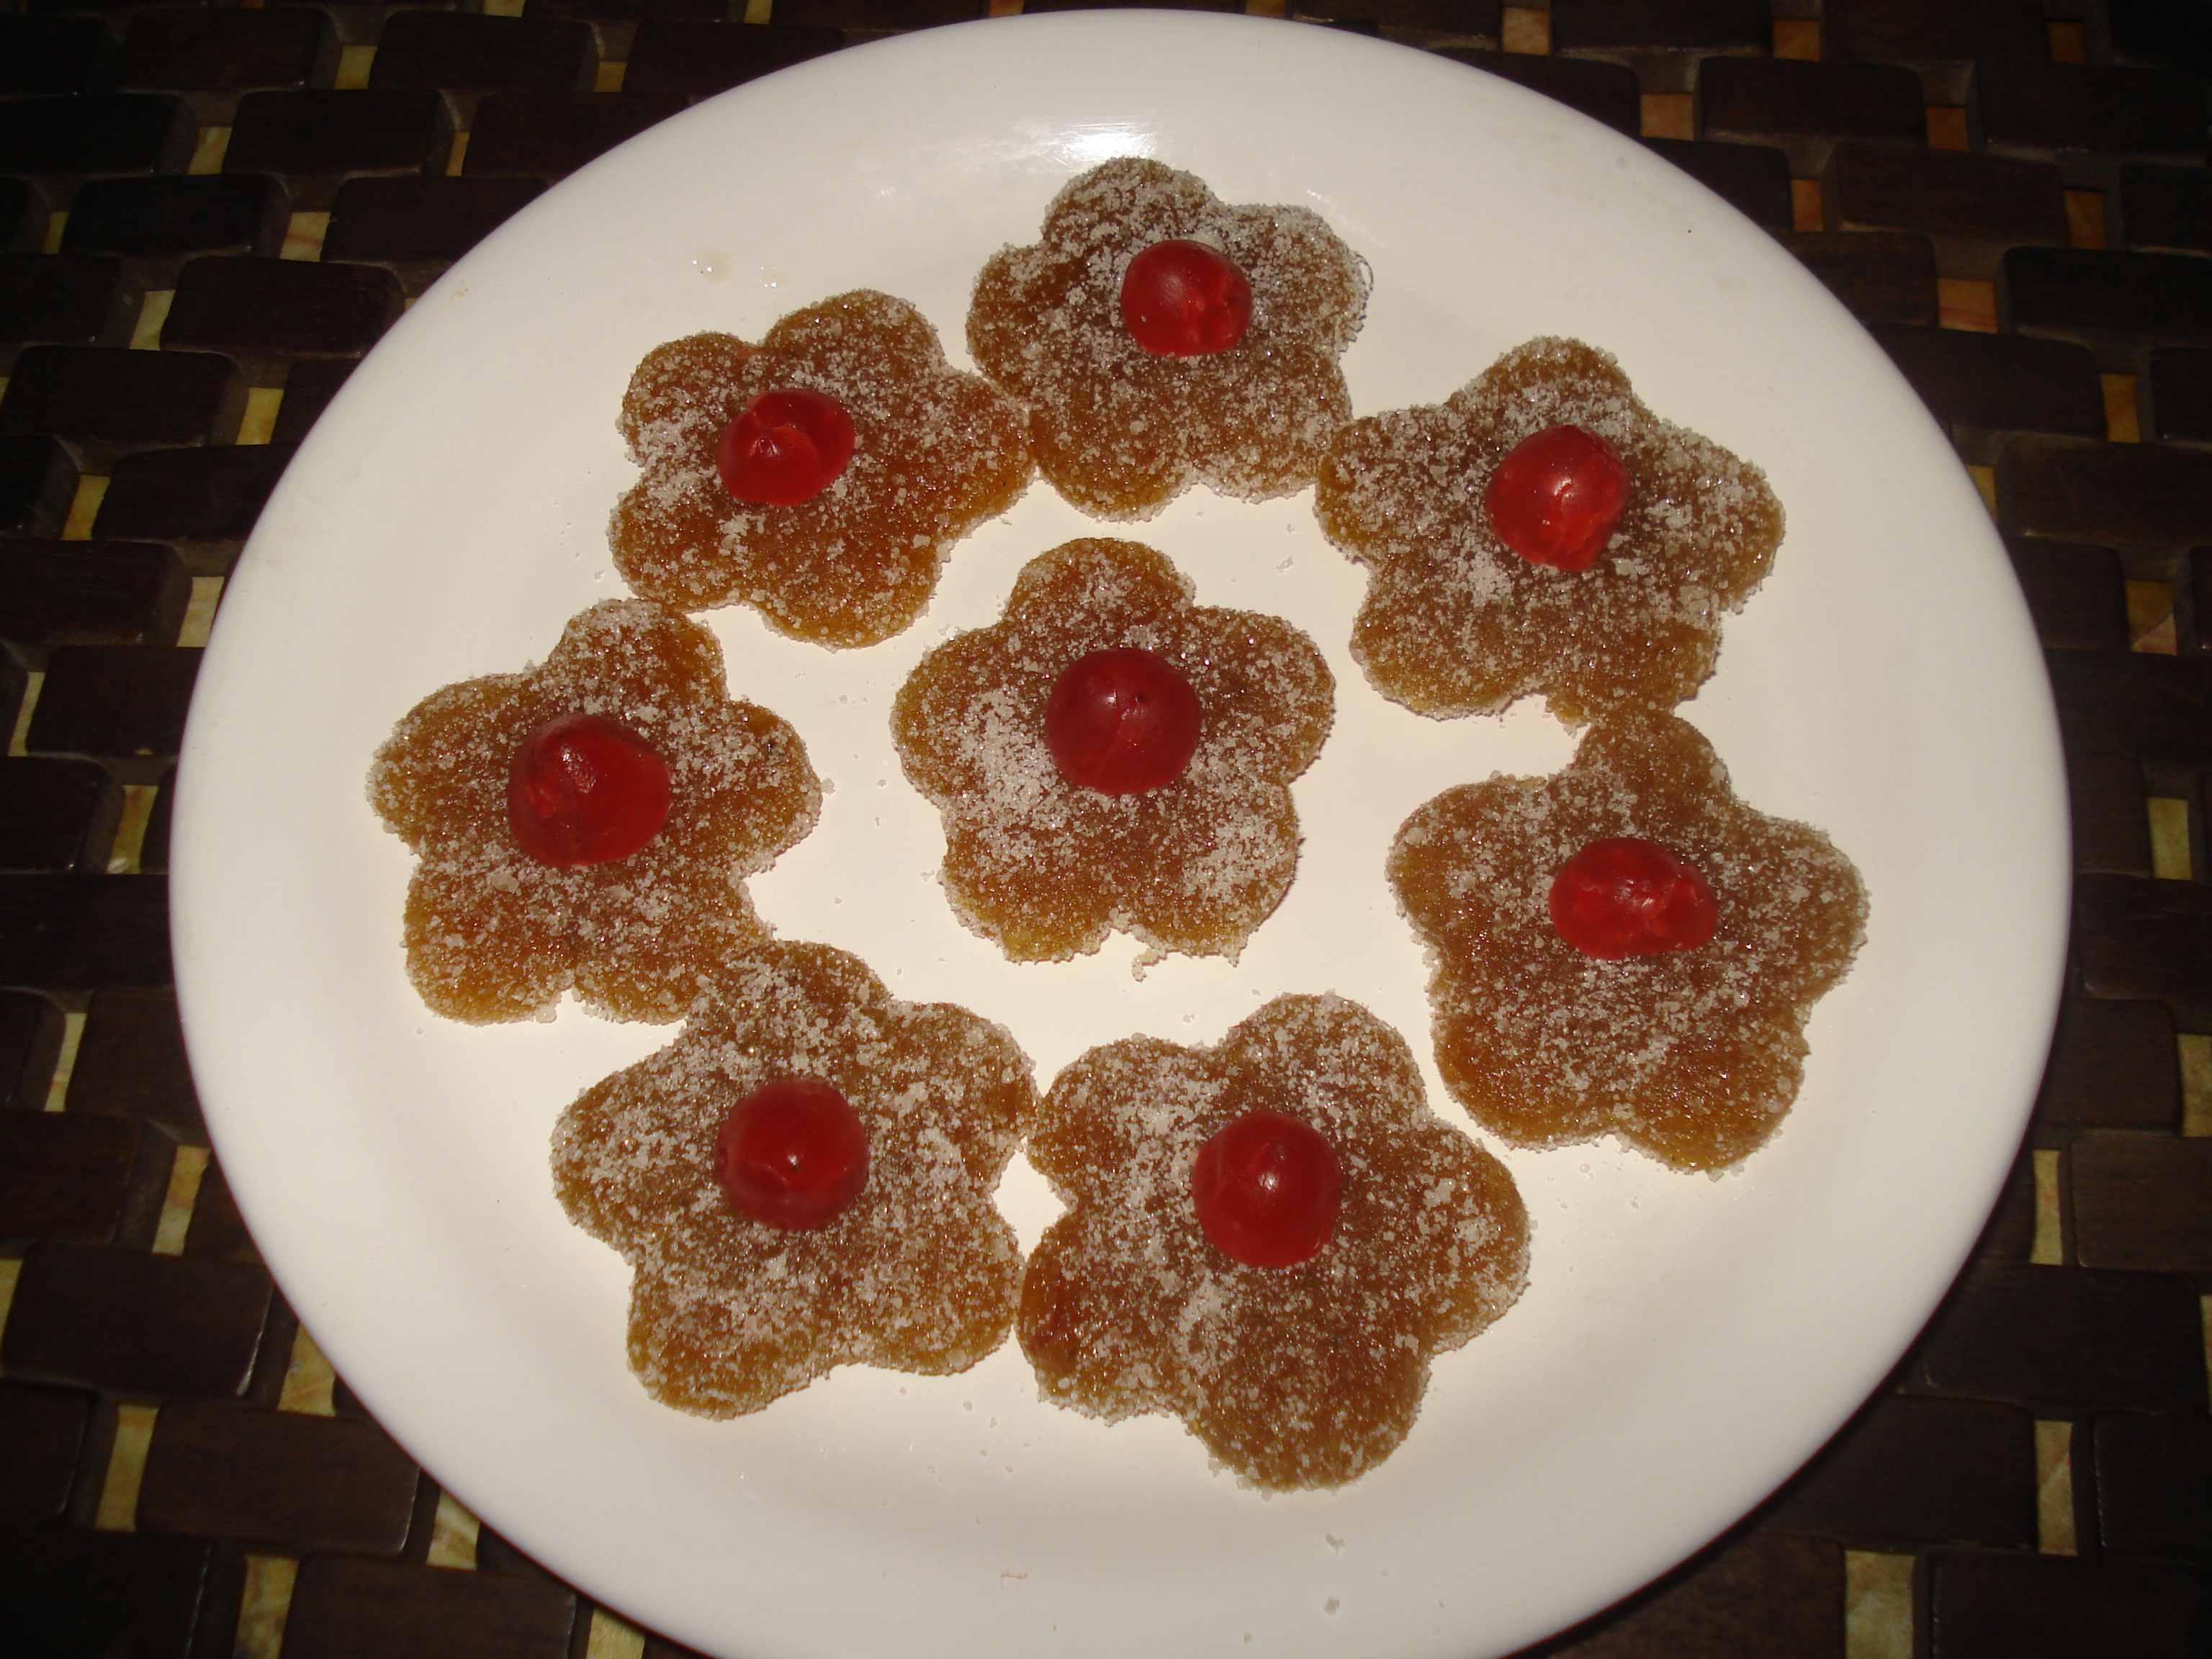  sweet and sour AMLA (Goose berries ) flower candy  (amla papad flower )